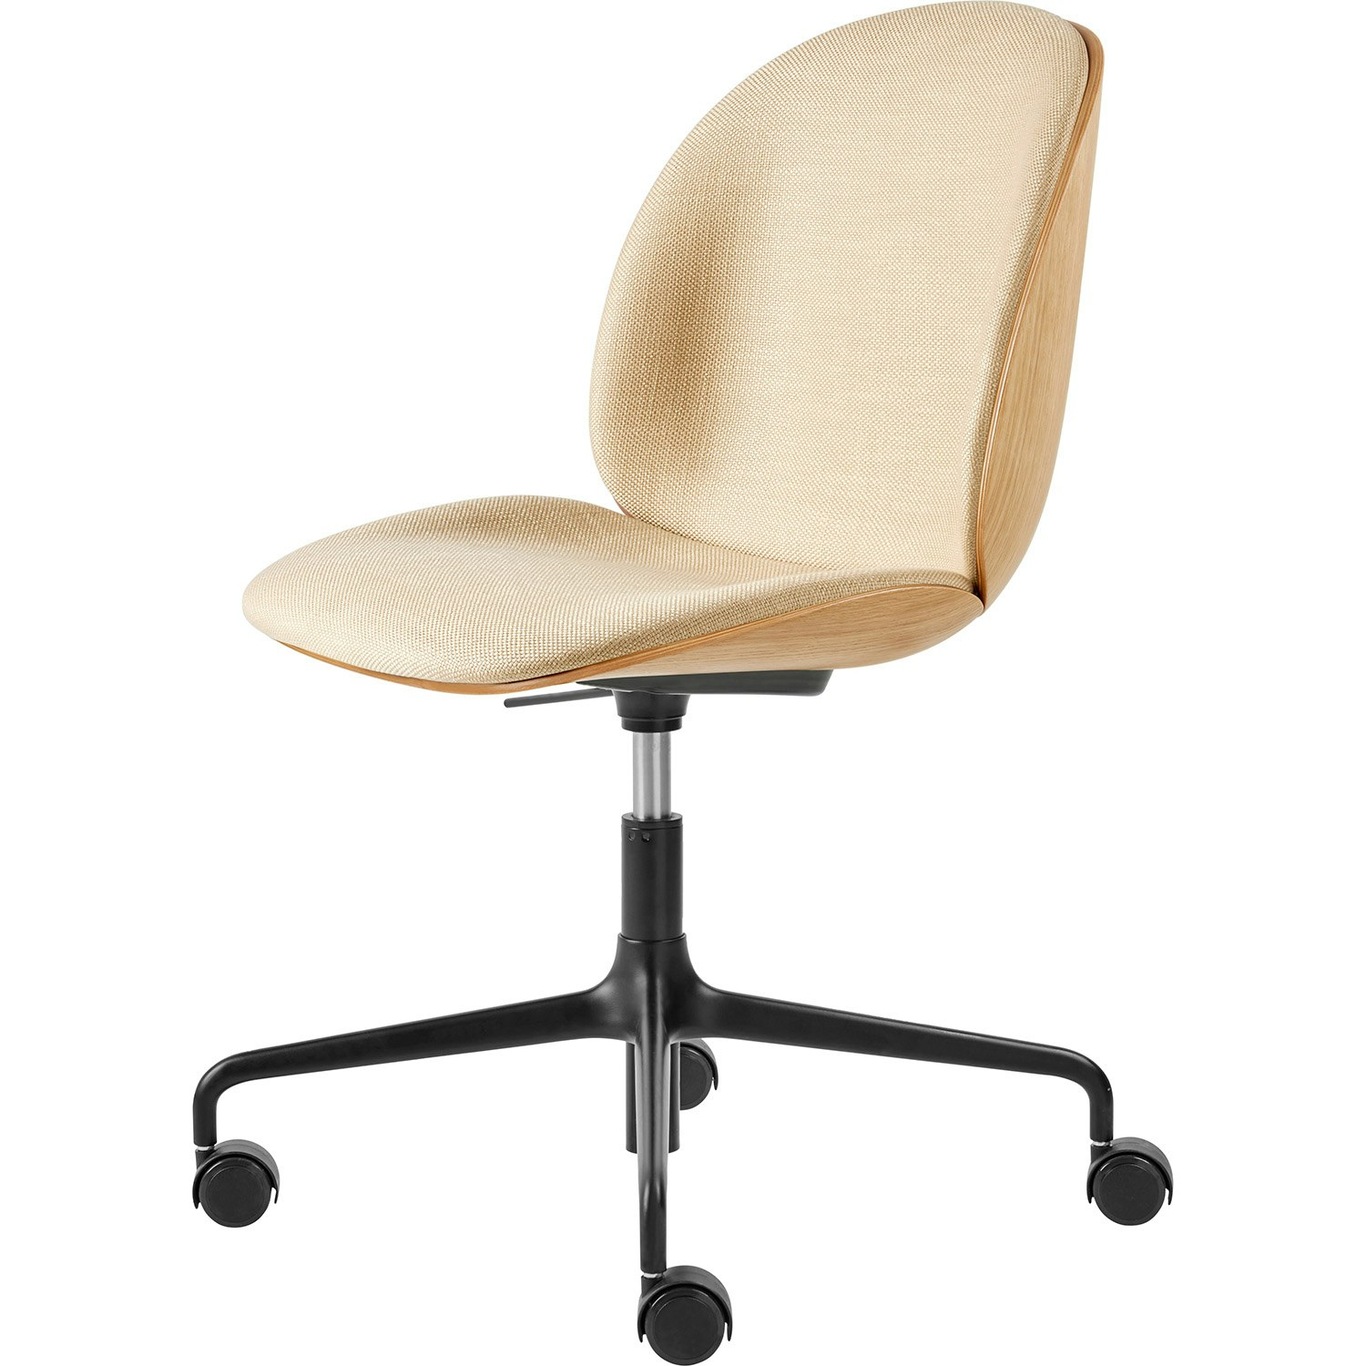 Beetle Swivel Chair Upholstered Front, Flair 134